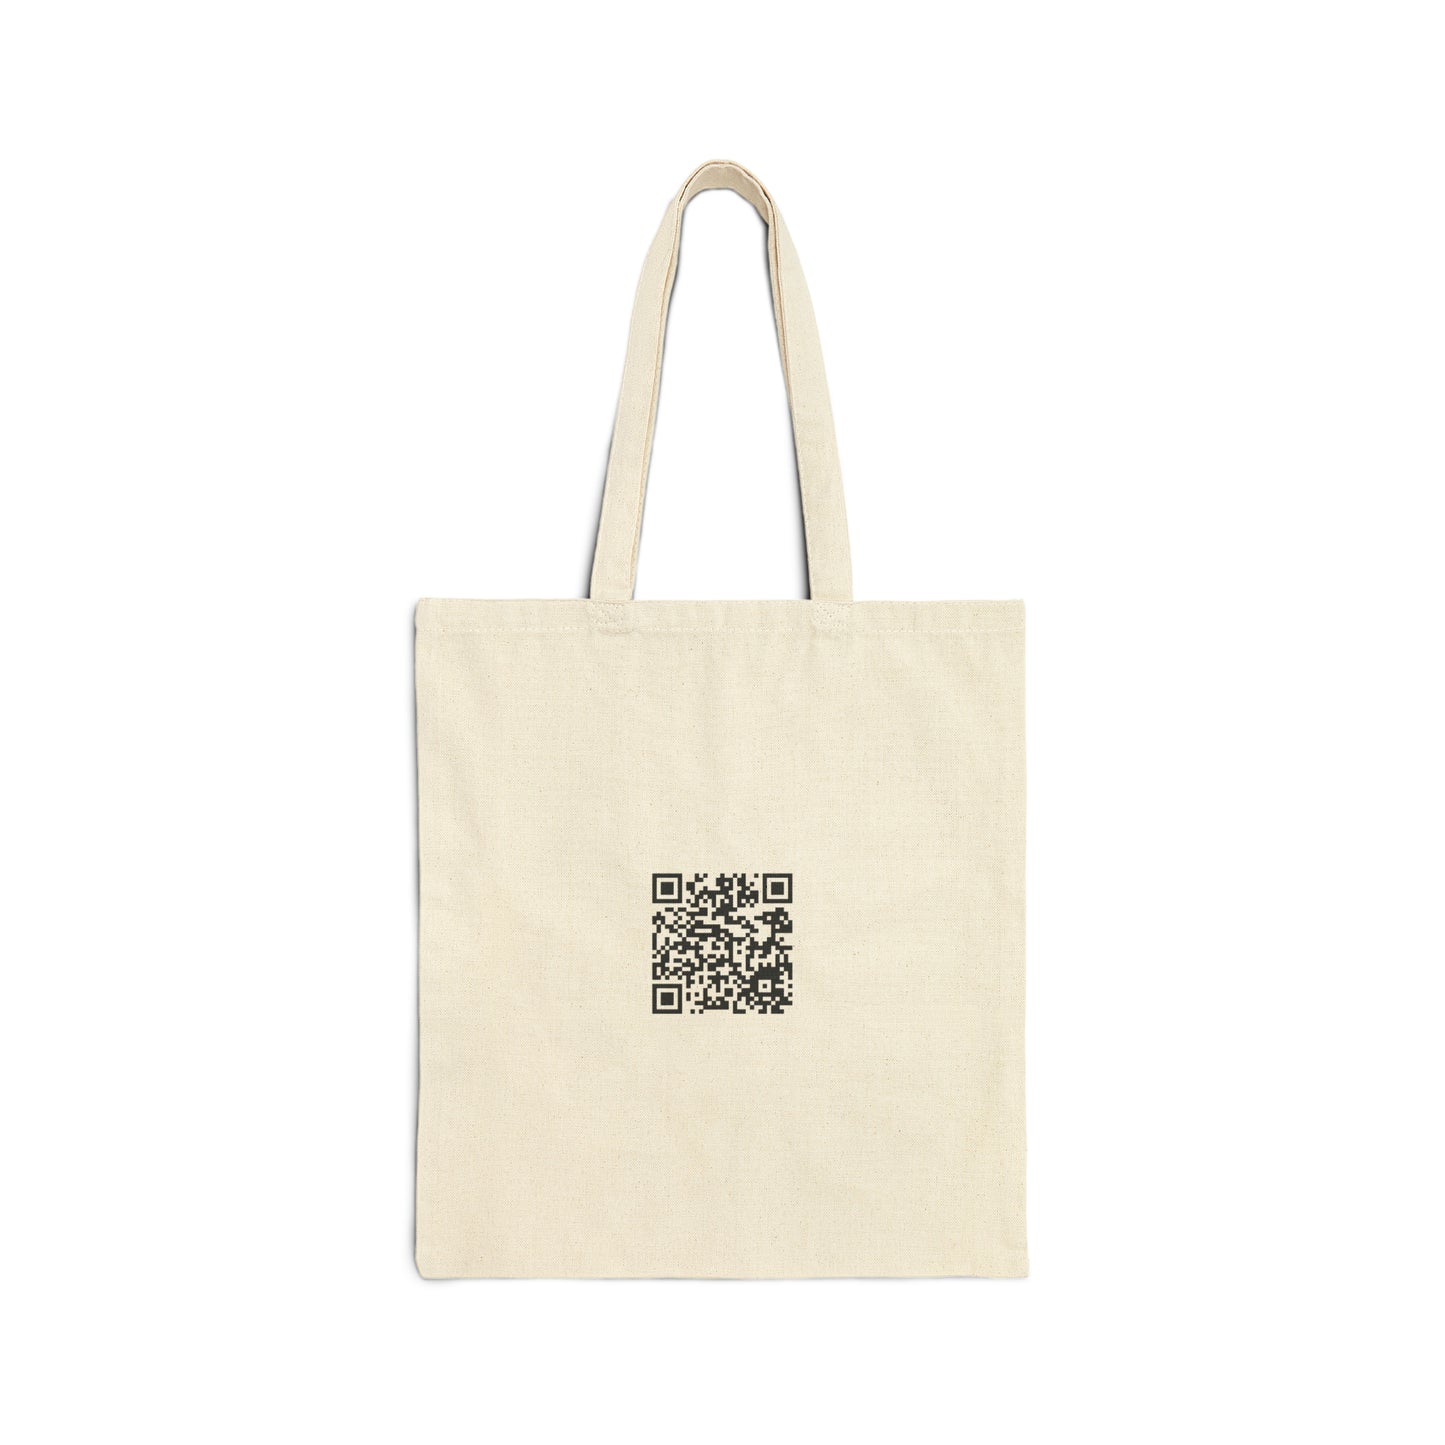 Legacy Of The Ripper - Cotton Canvas Tote Bag